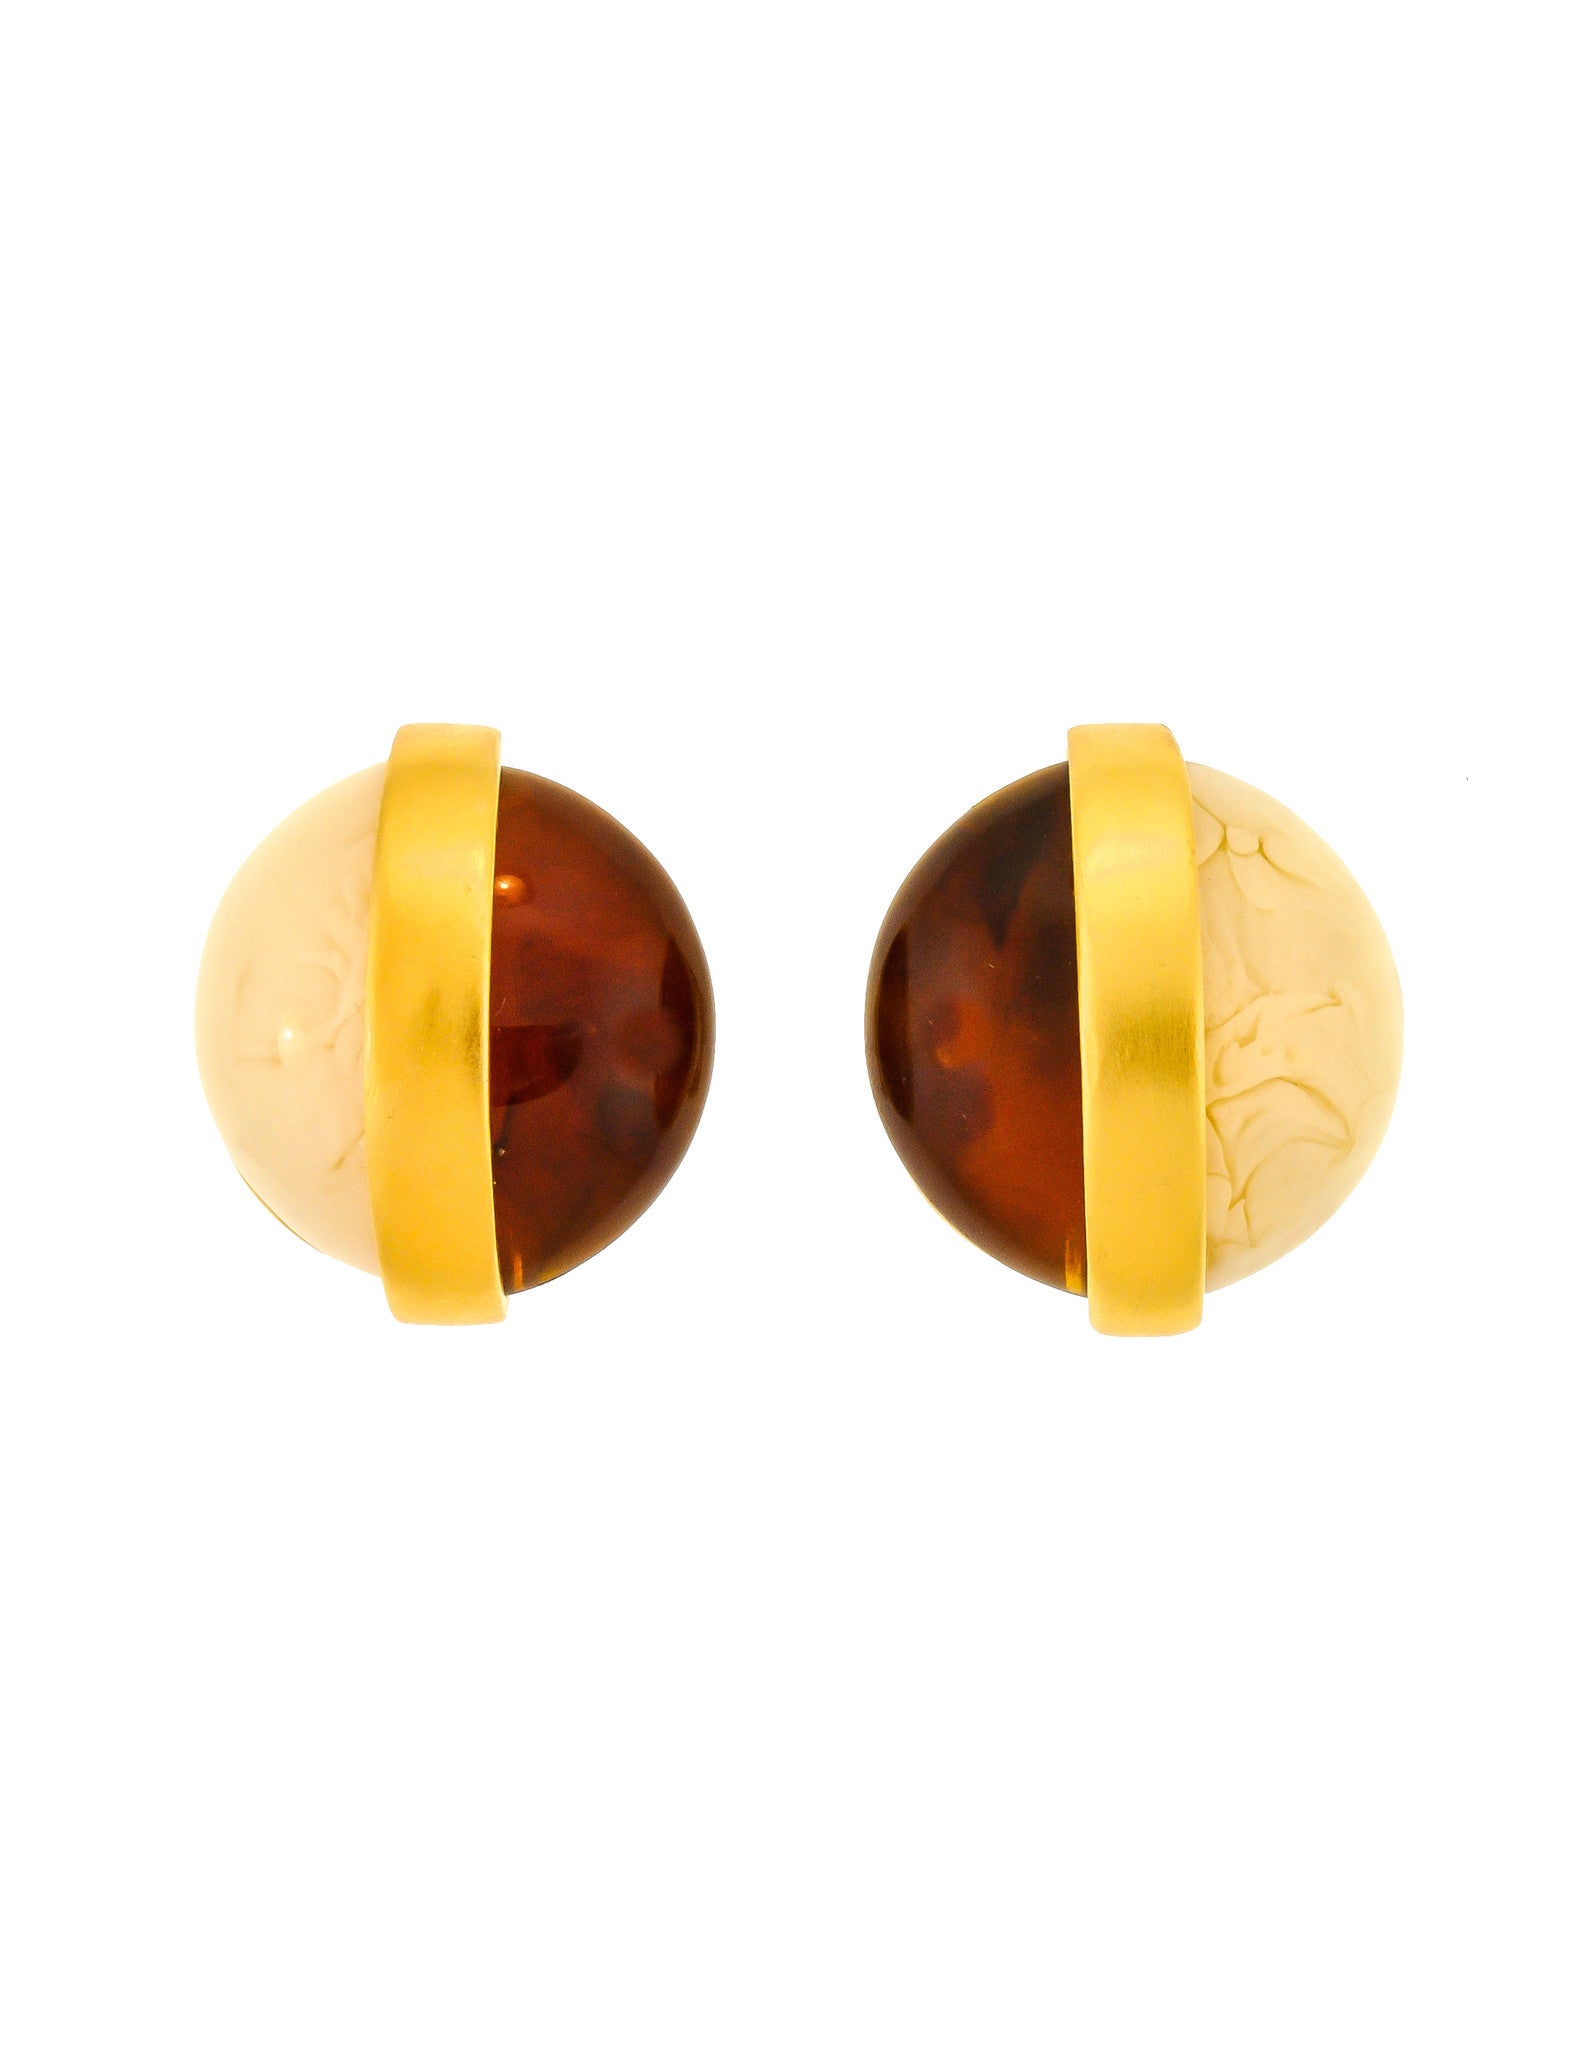 Givenchy Vintage Two Tone Gold Earrings - Amarcord Vintage Fashion
 - 1